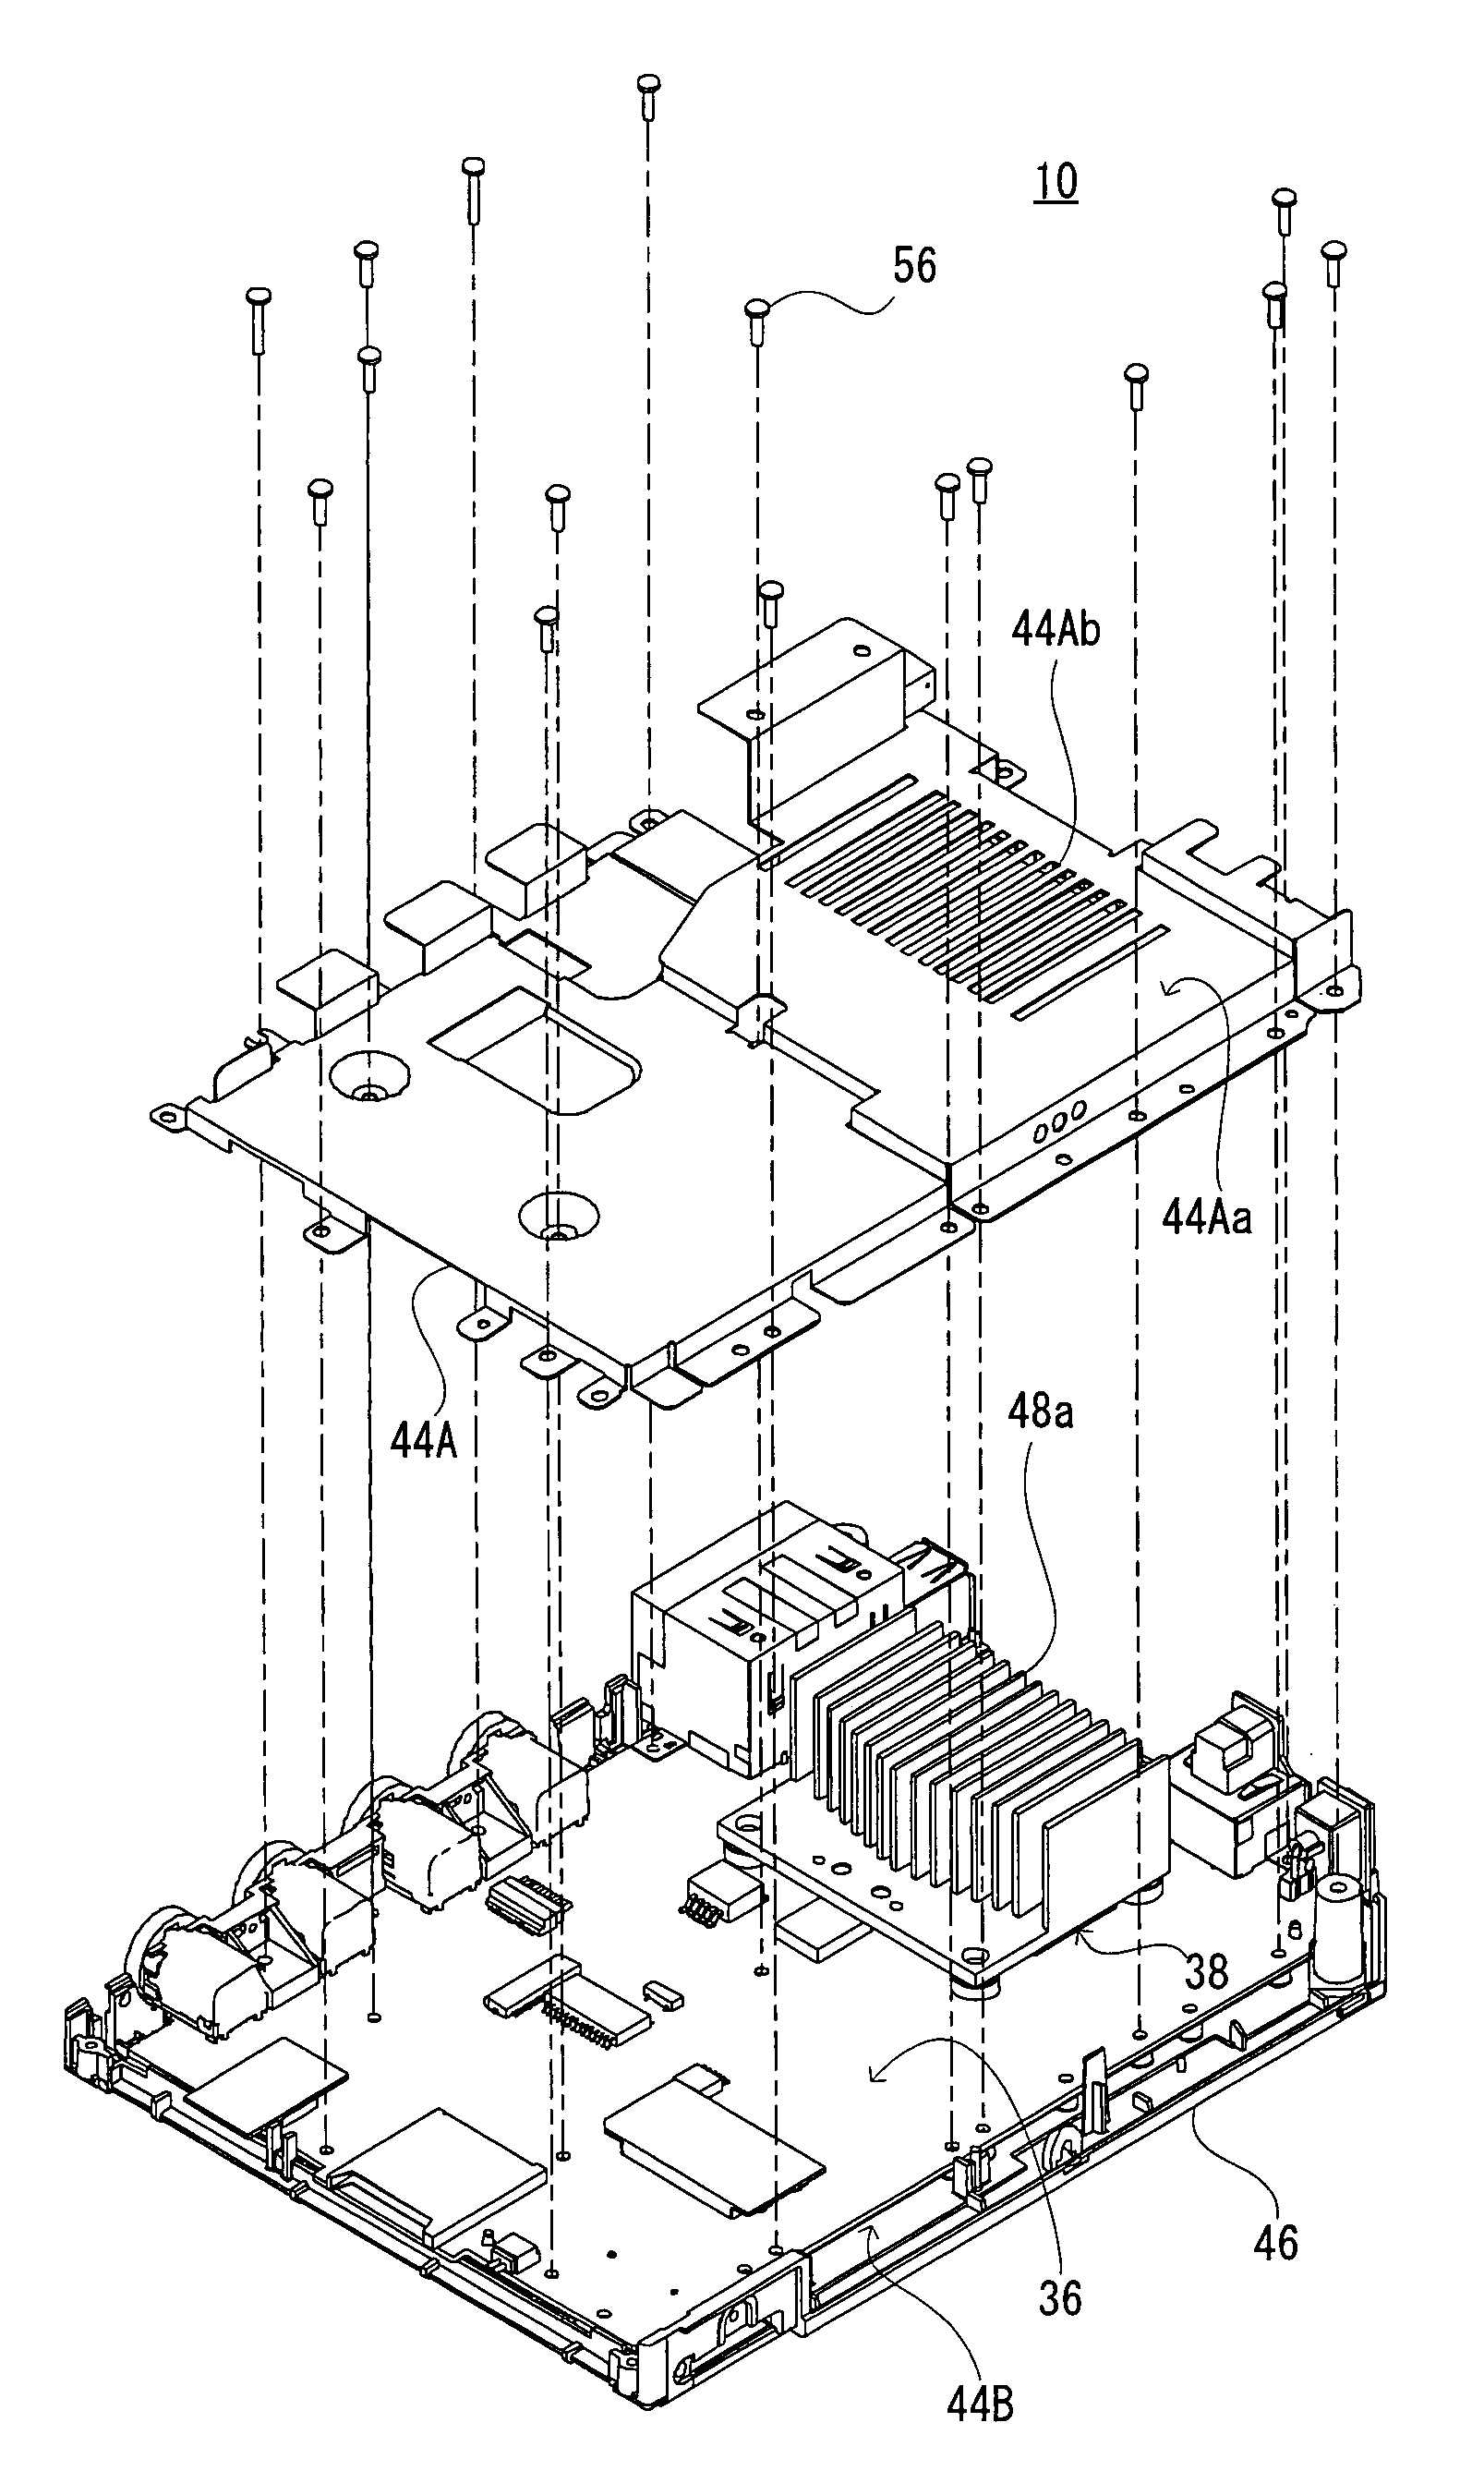 Electronic appliance having an electronic component and a heat-dissipating plate